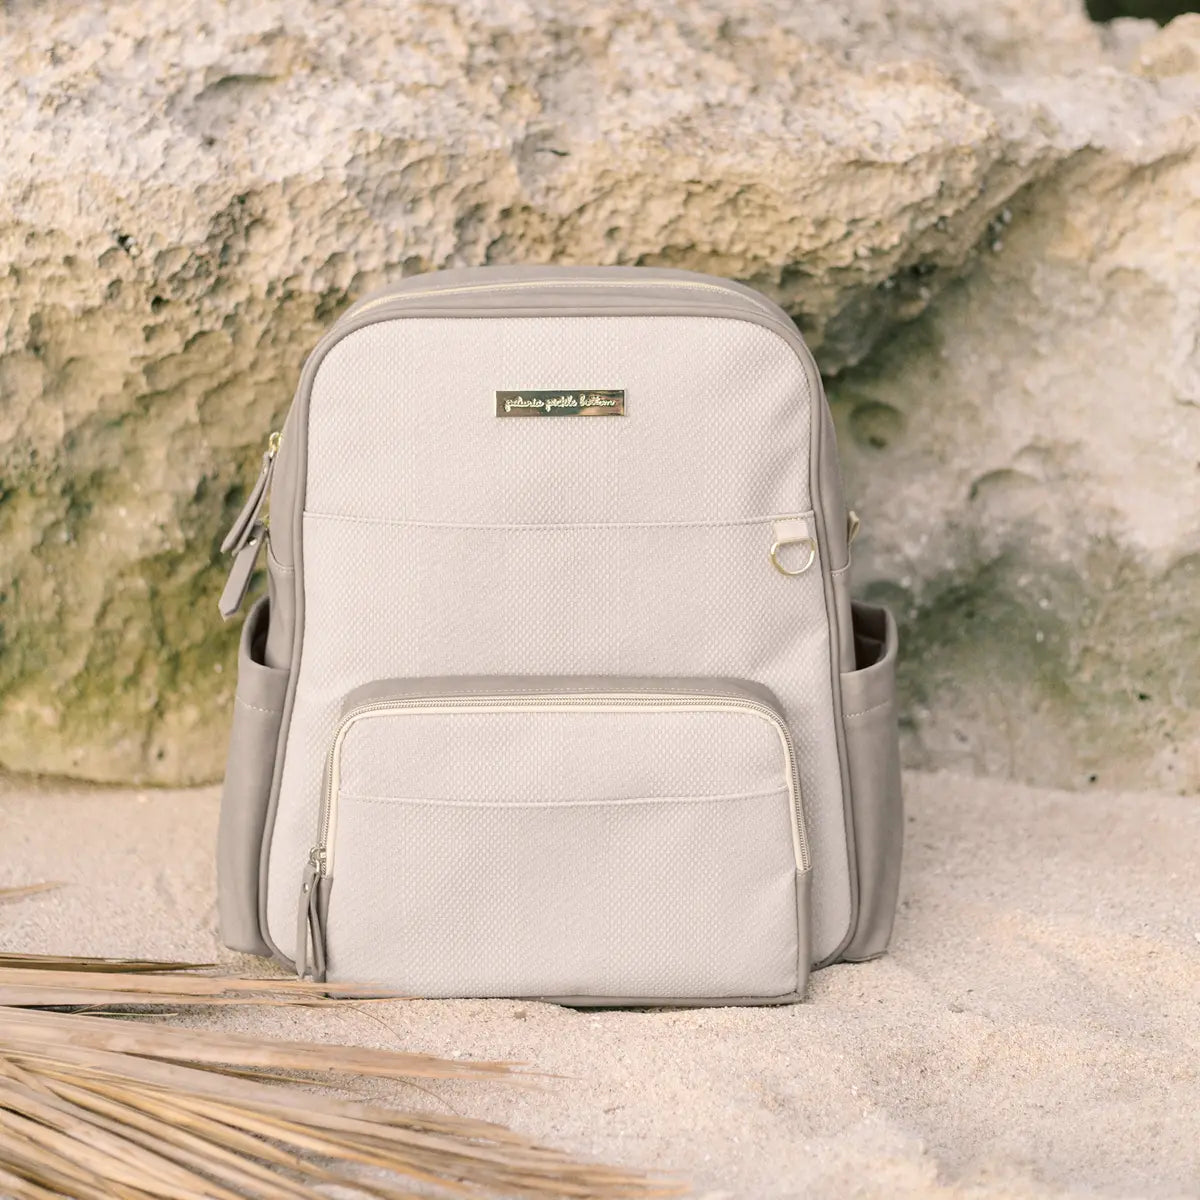 Sync Diaper Bag Backpack shown in grey matte color styled on a sandy beach with rocks in the background